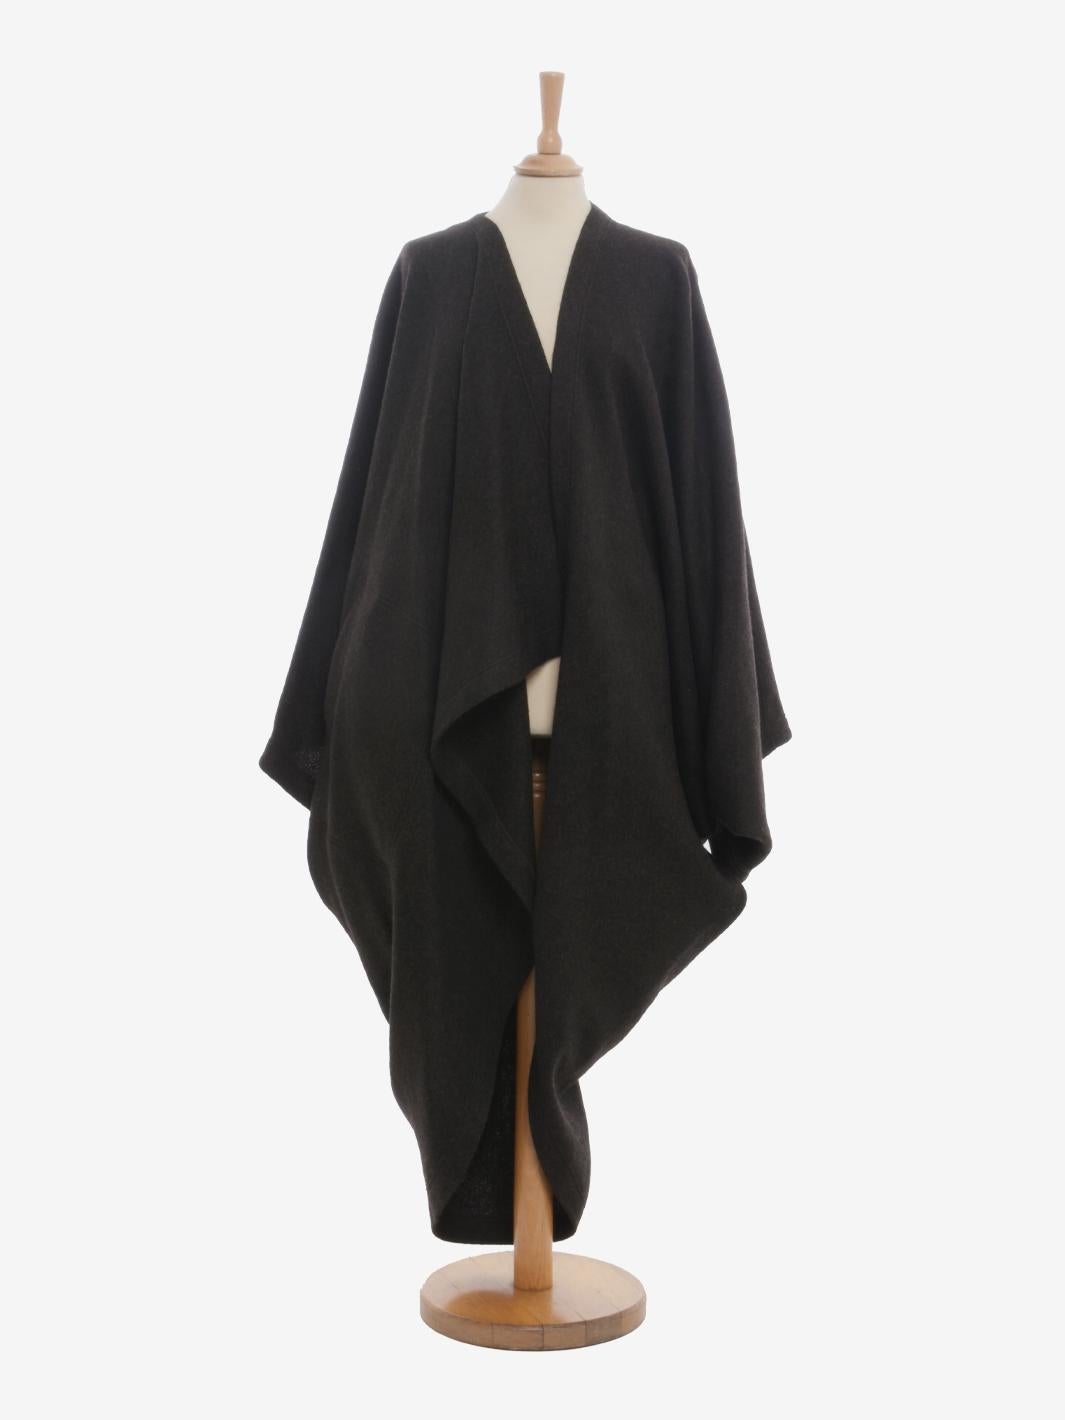 Issey Miyake Wool Dolman Coat Wool Dolman Coat is a garment from the Permanente collection launched in 1985, known for revived original shapes and fabrics used in previous Issey Miyake collections. The outerwear features large volumes, dolman